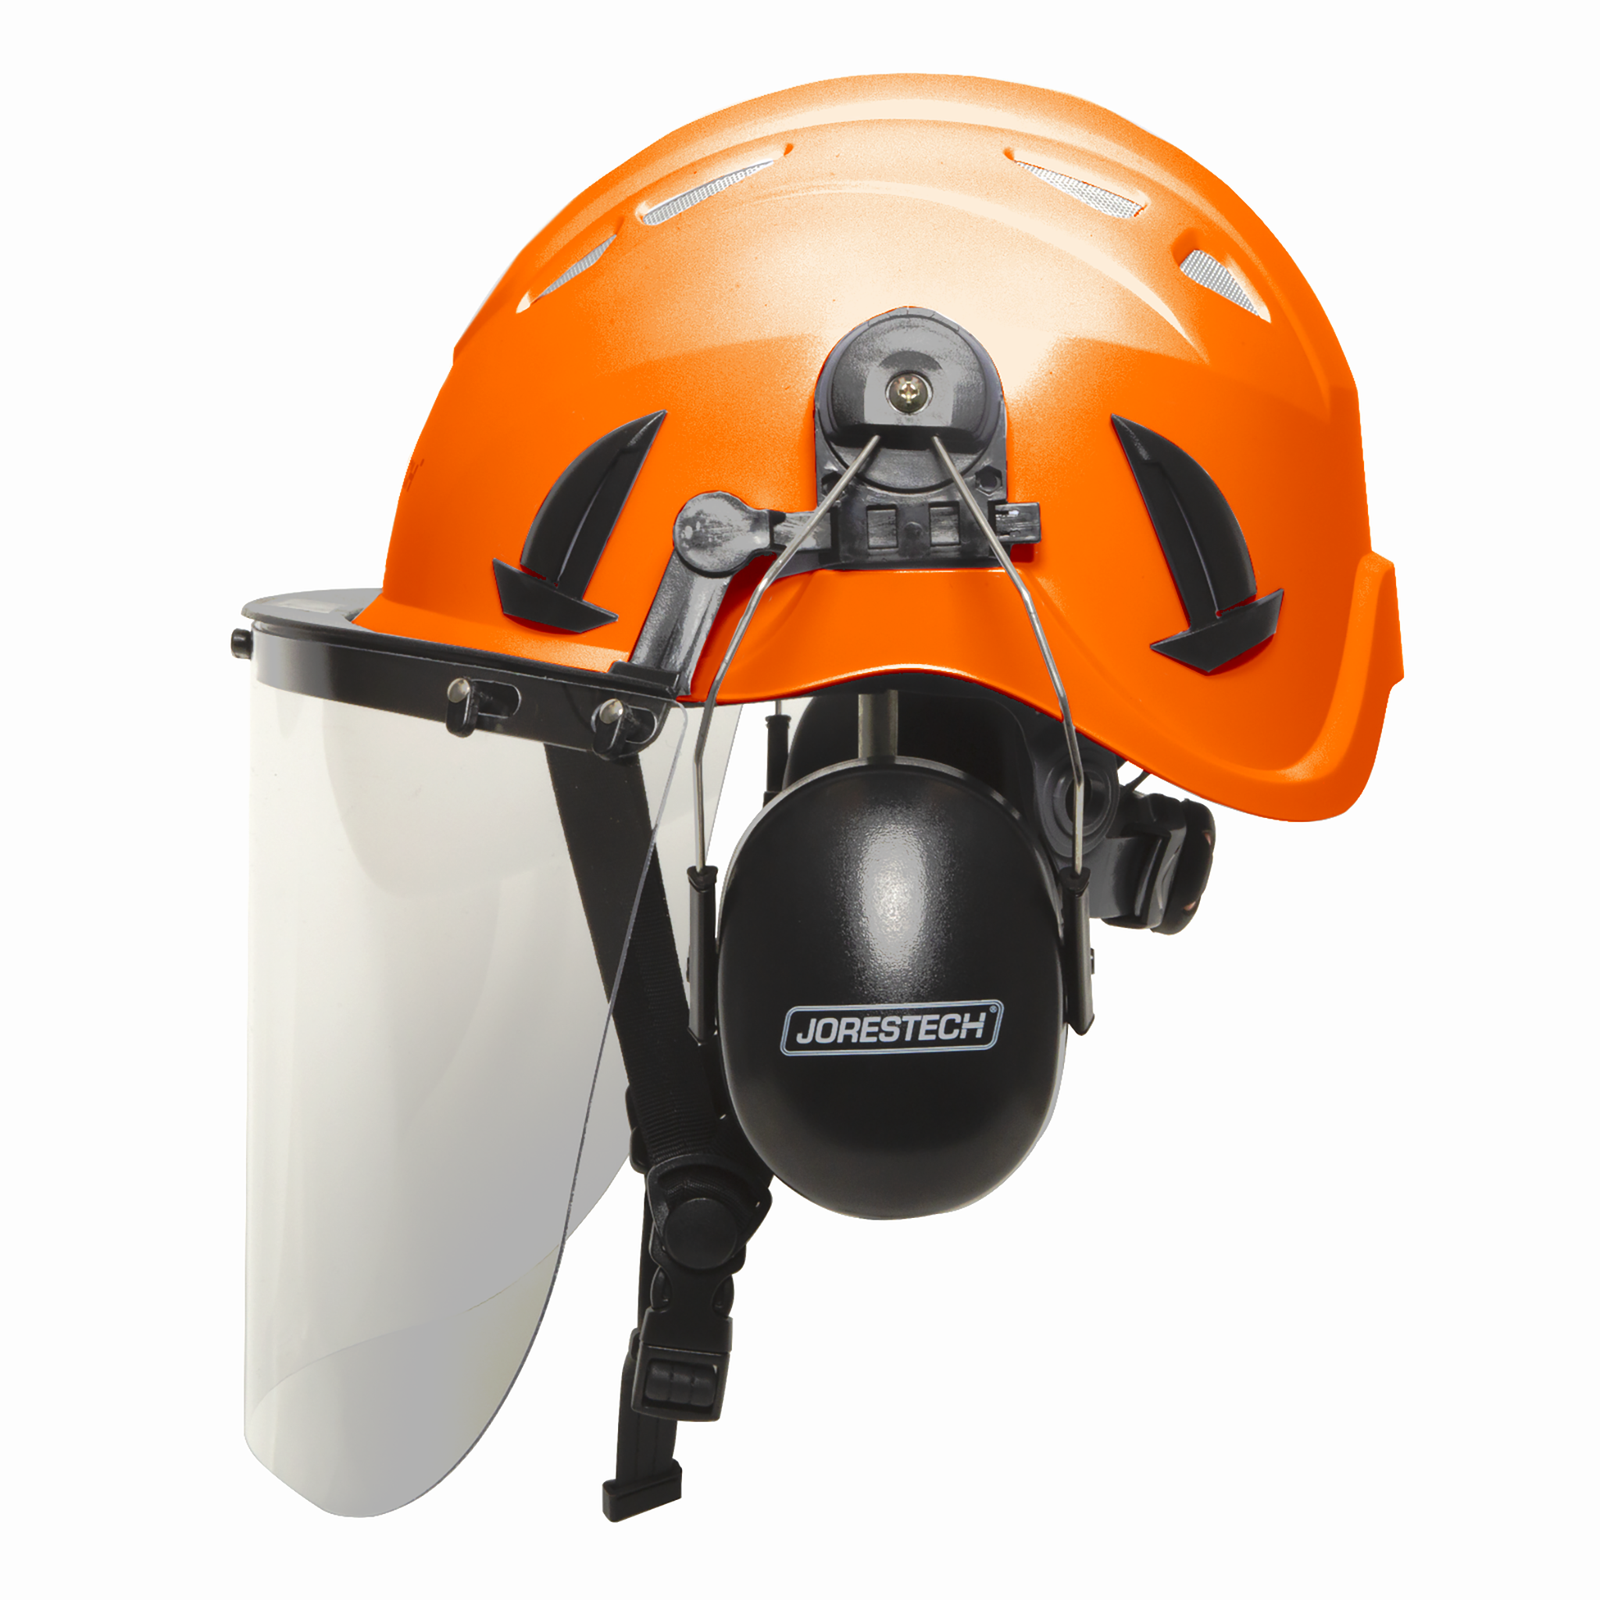 Side view of a orange ventilated safety hard hat system with clear plastic face shield and black ear muffs included